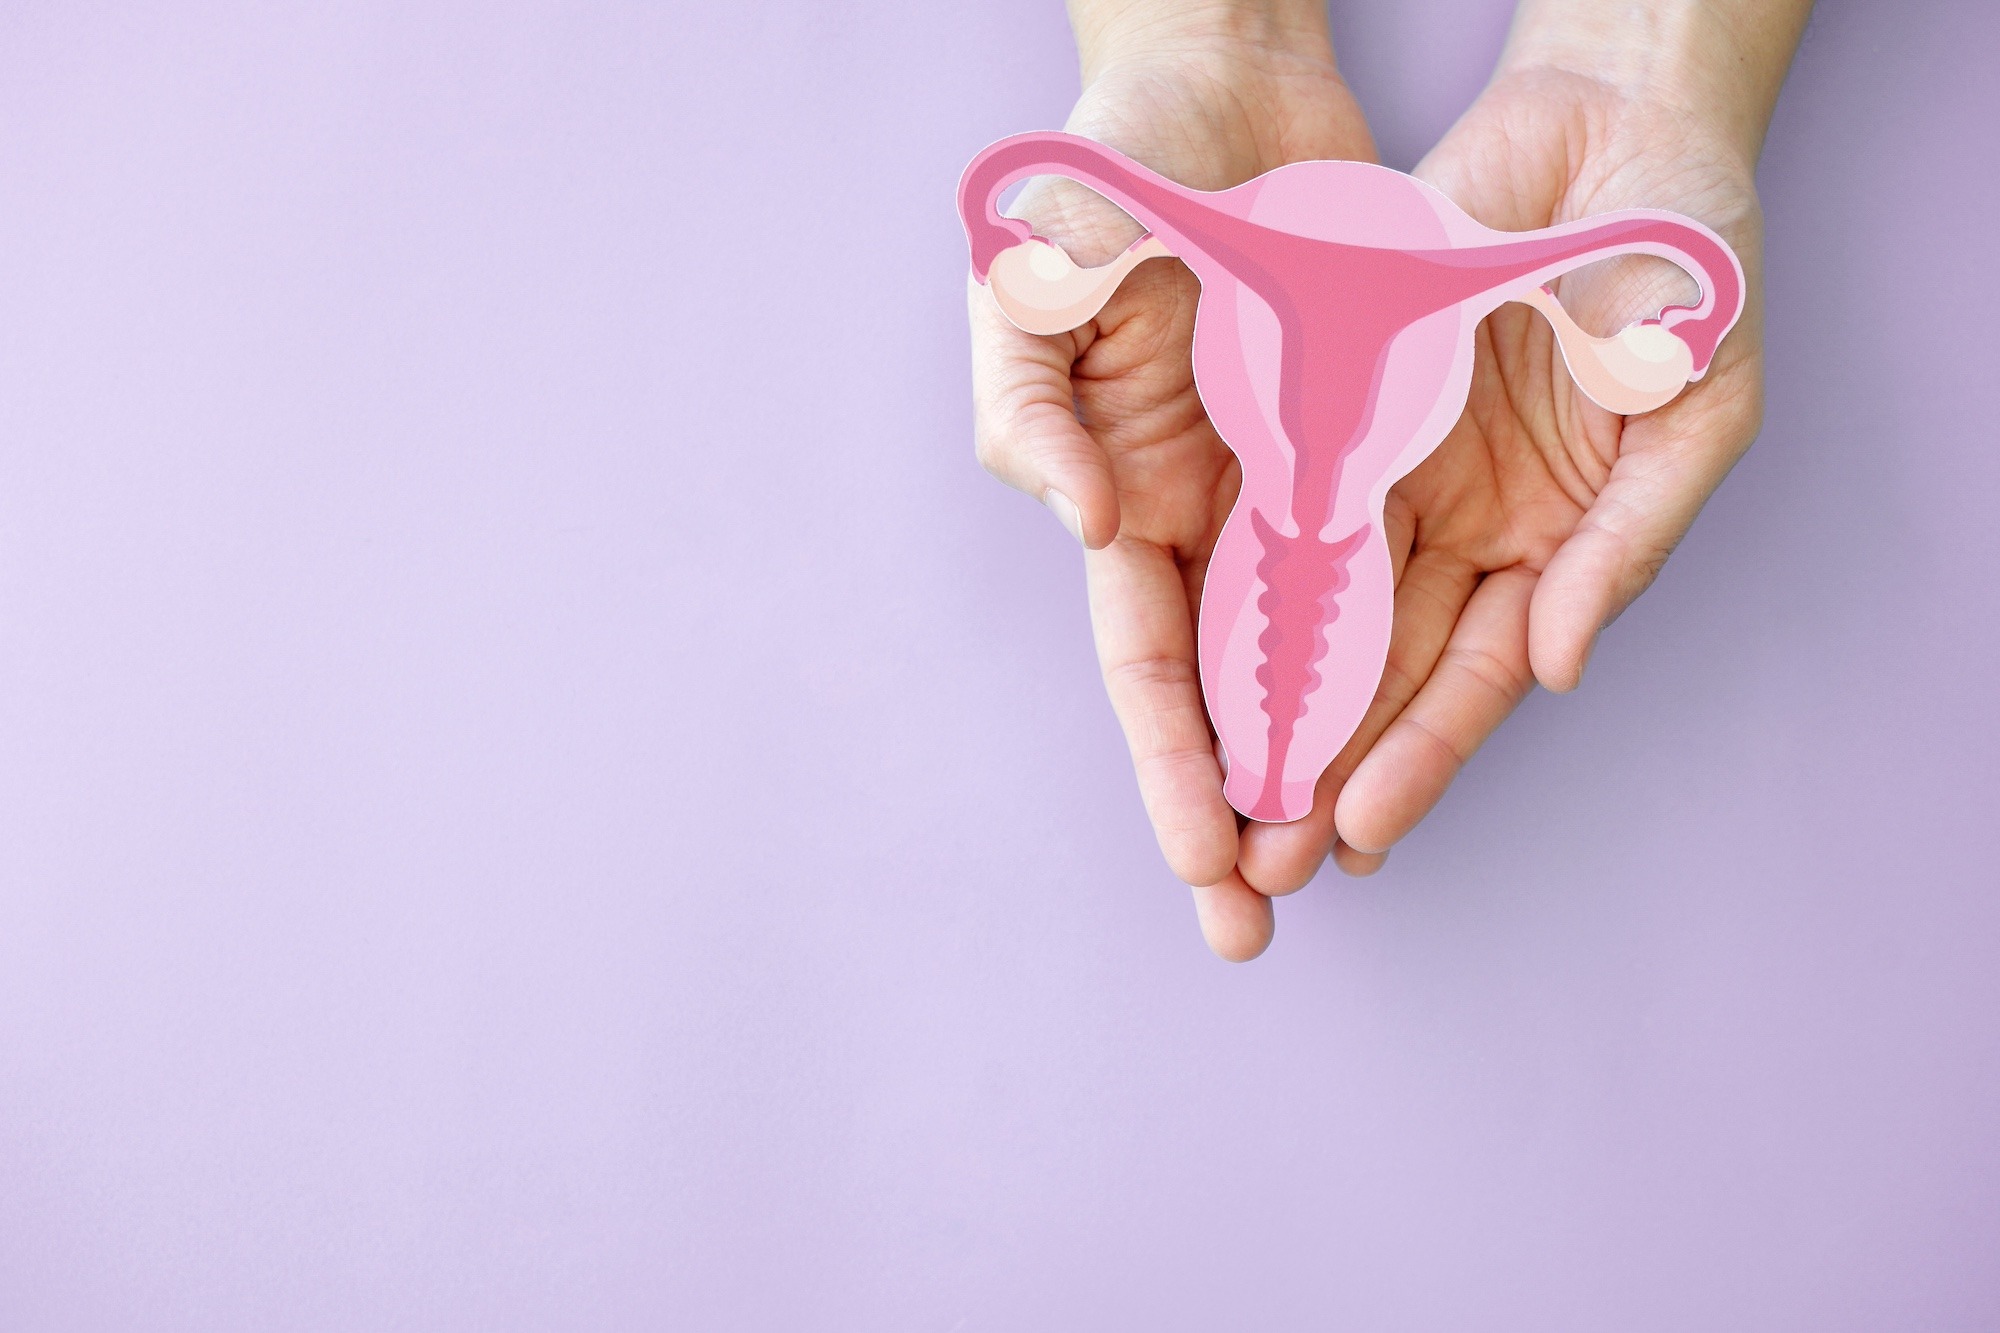 PAP SMEAR: YOUR ESSENTIAL STEP TOWARDS WOMEN’S HEALTH